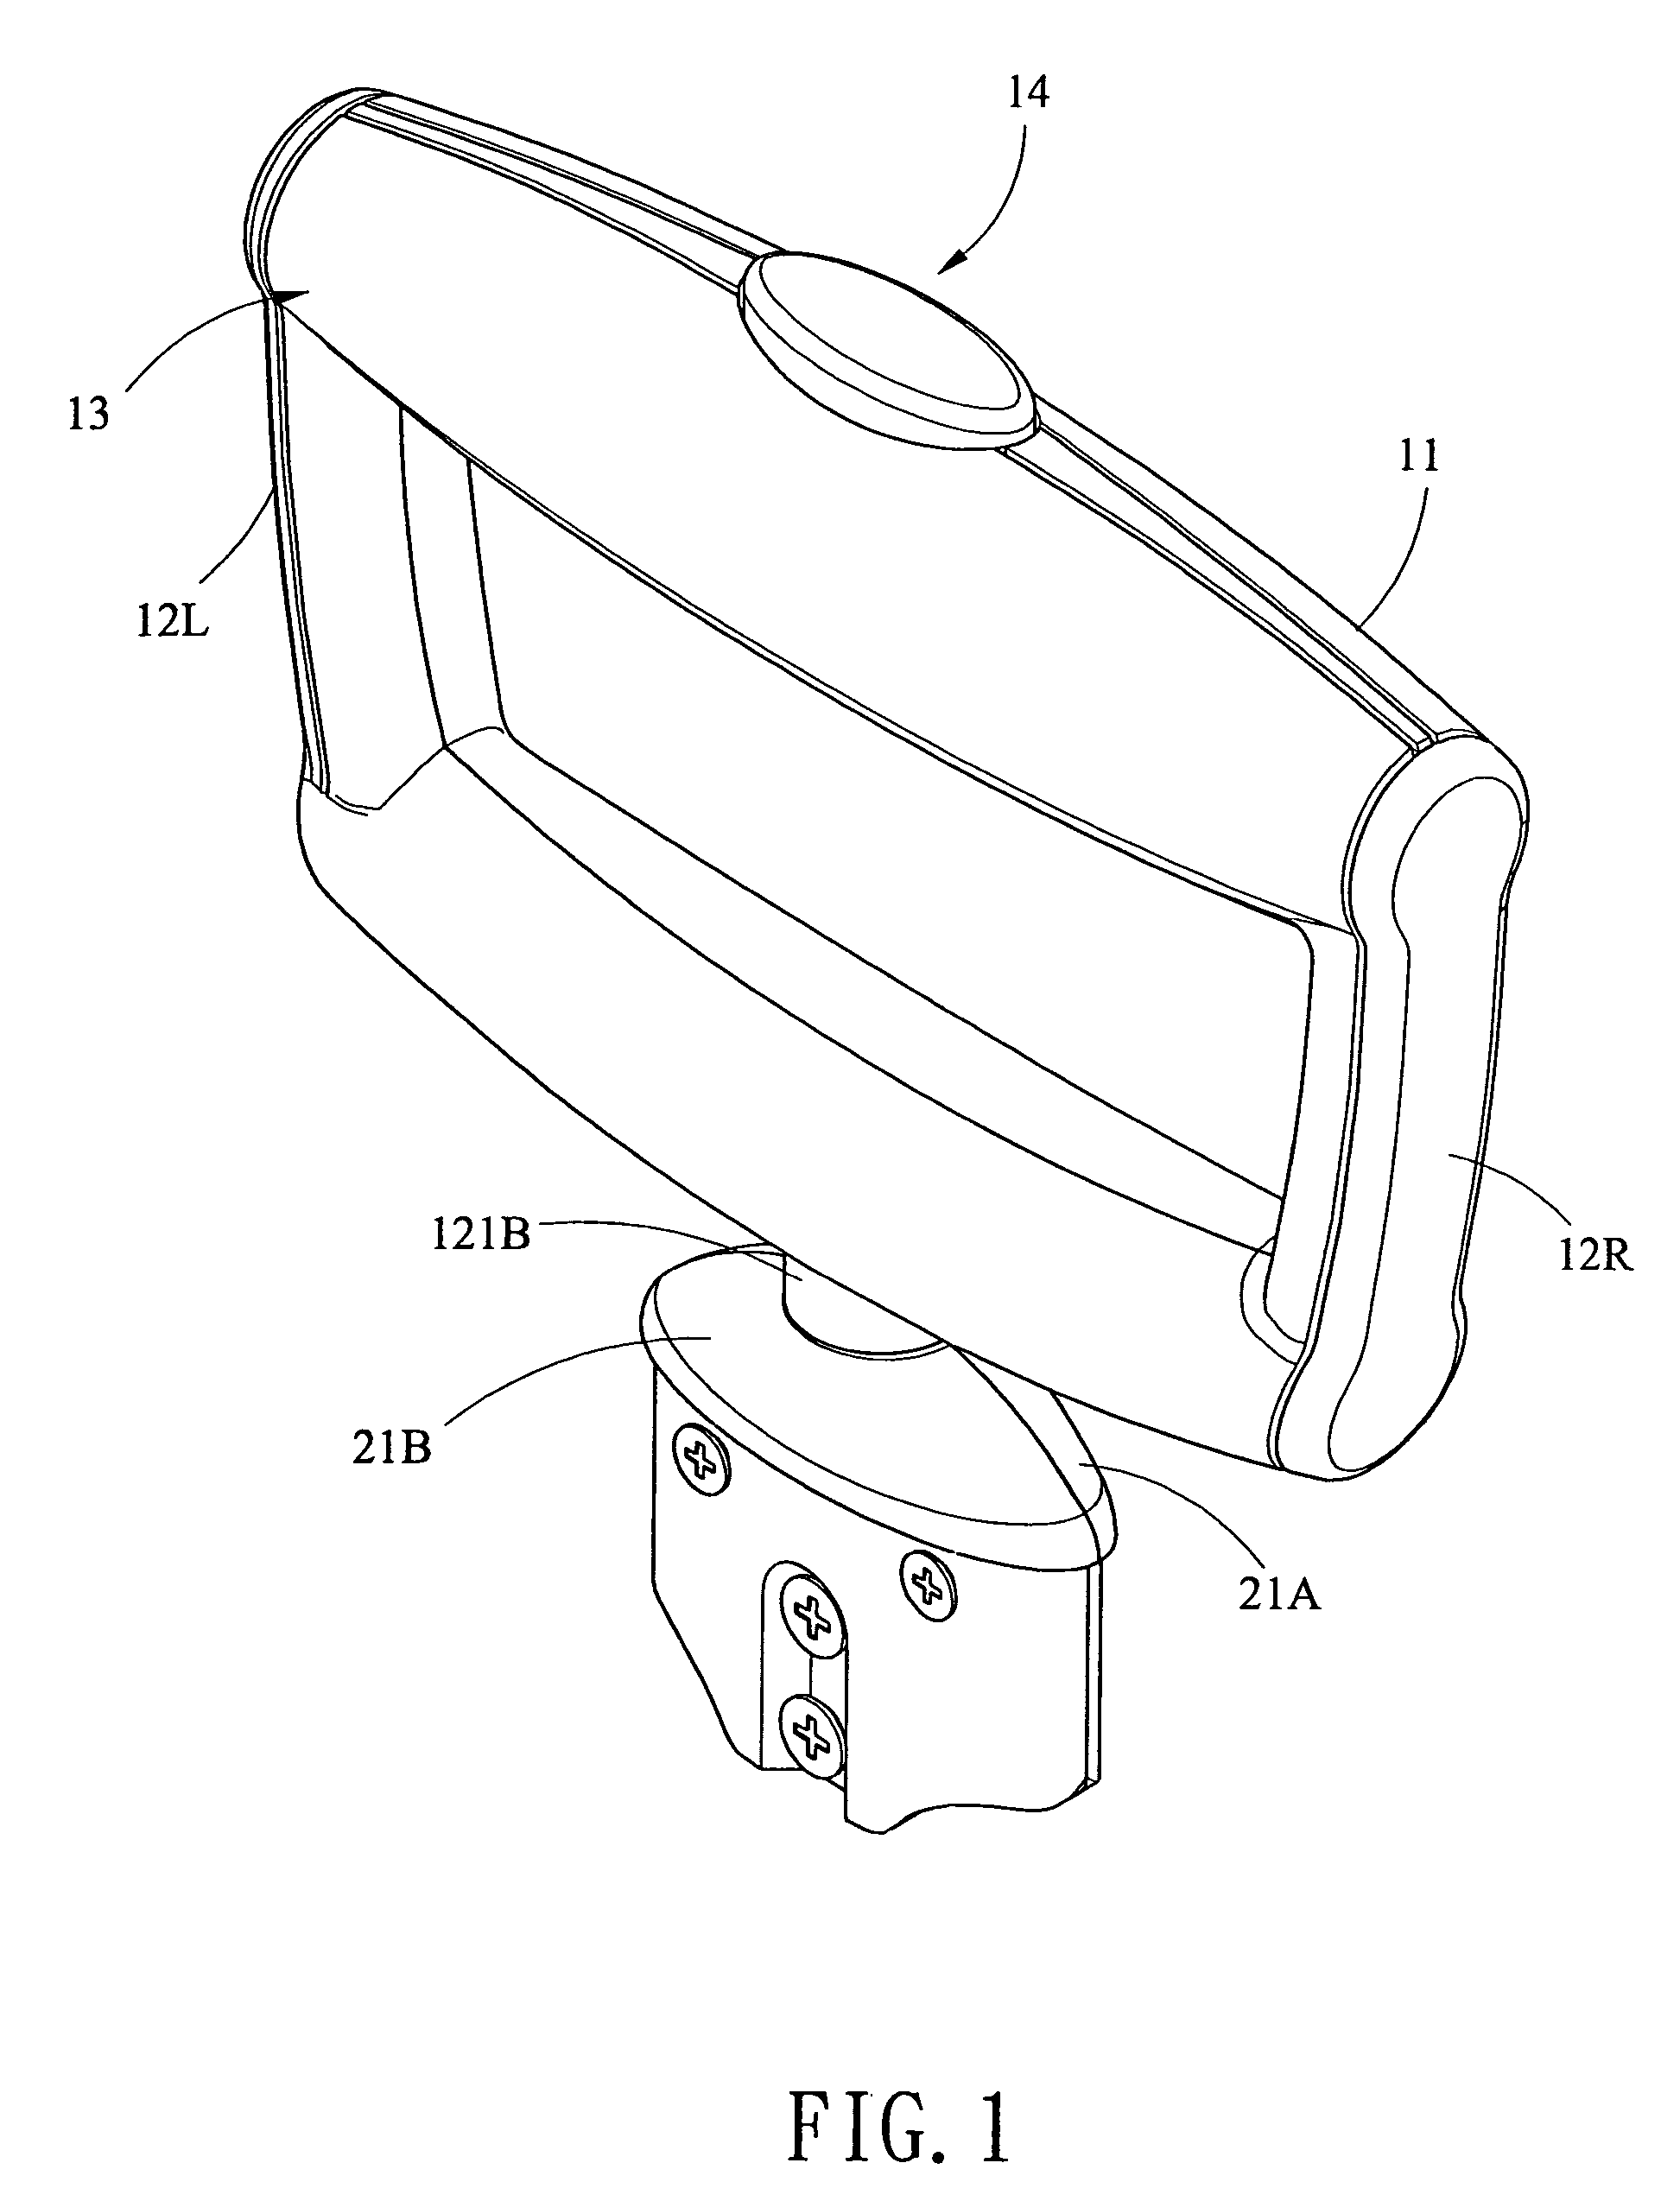 Retractable handle of wheeled luggage having one or two pulling rods